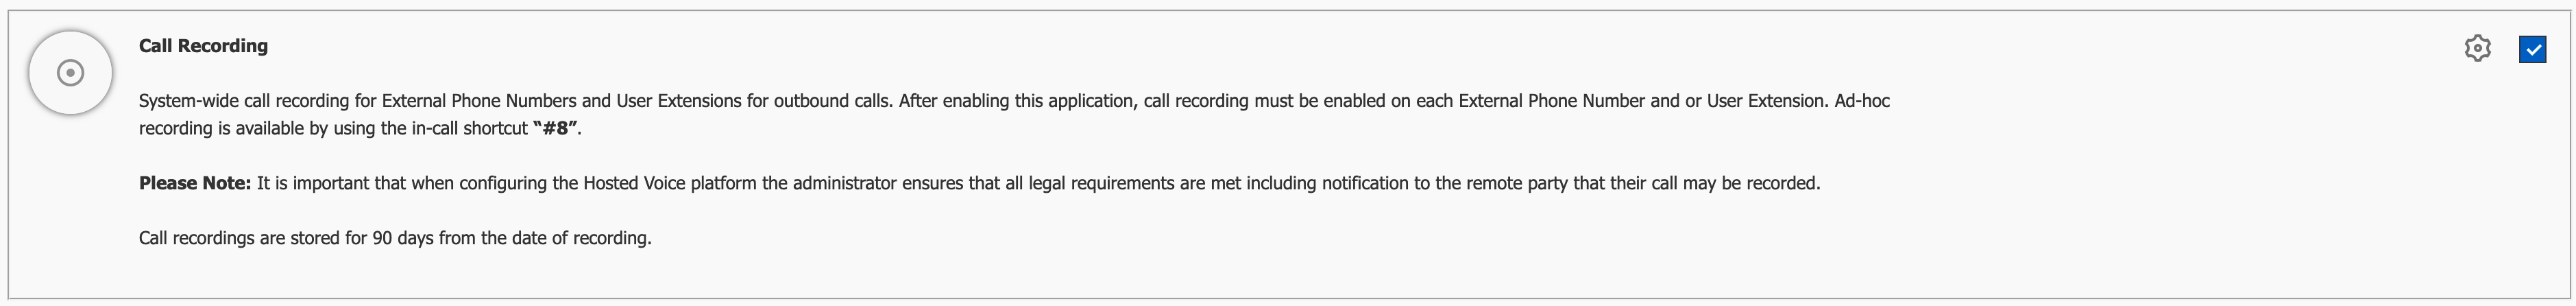 enable call recording